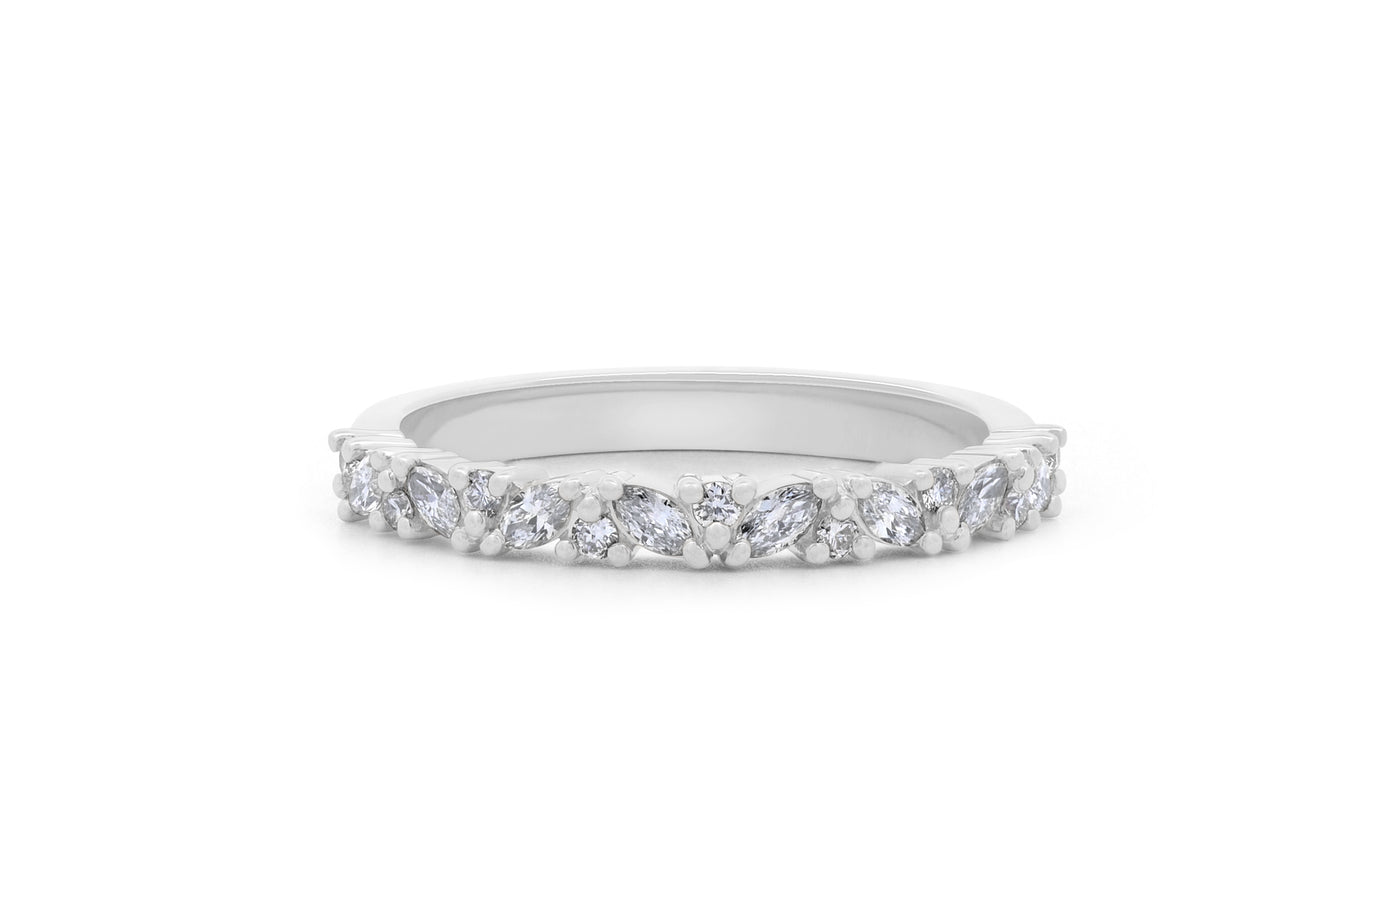 Marquise and Brilliant Cut Diamond Set Ring